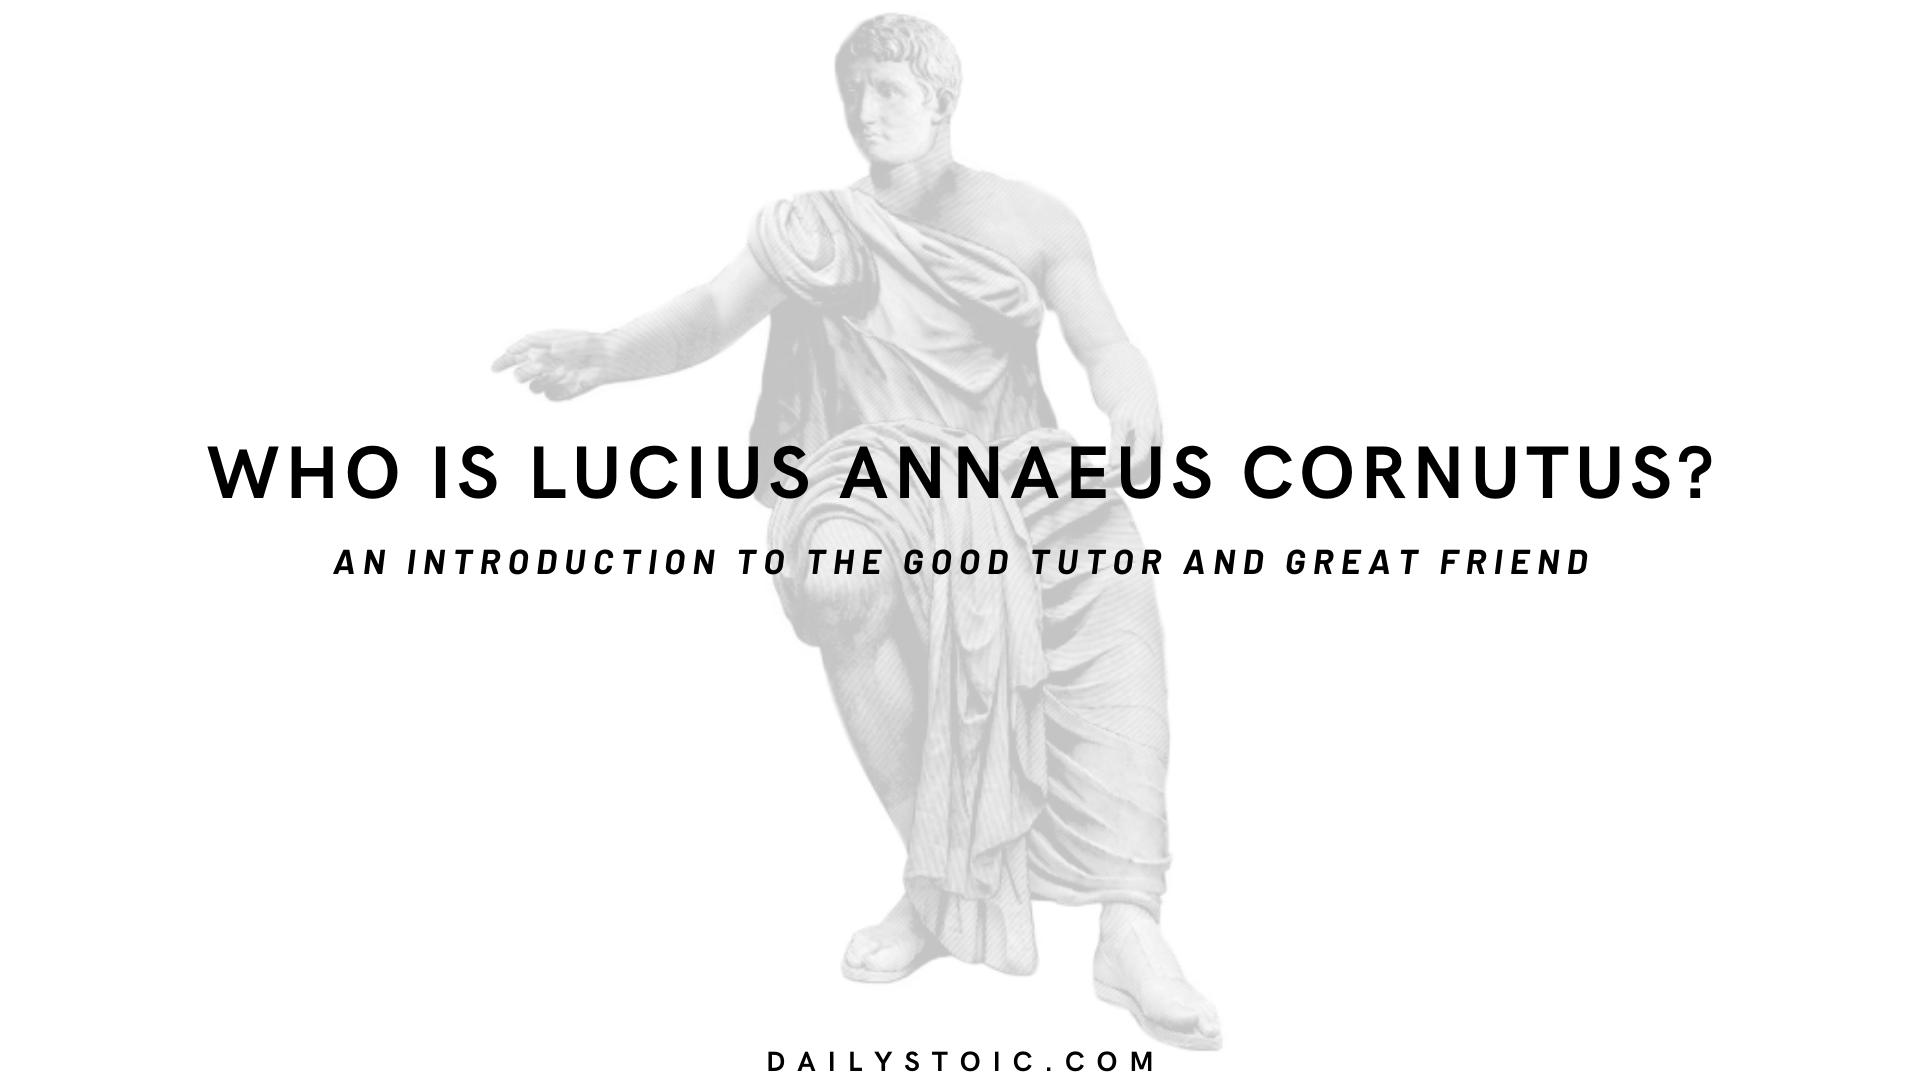 Who Is Lucius Annaeus Cornutus? An Introduction To The Good Tutor And Great Friend